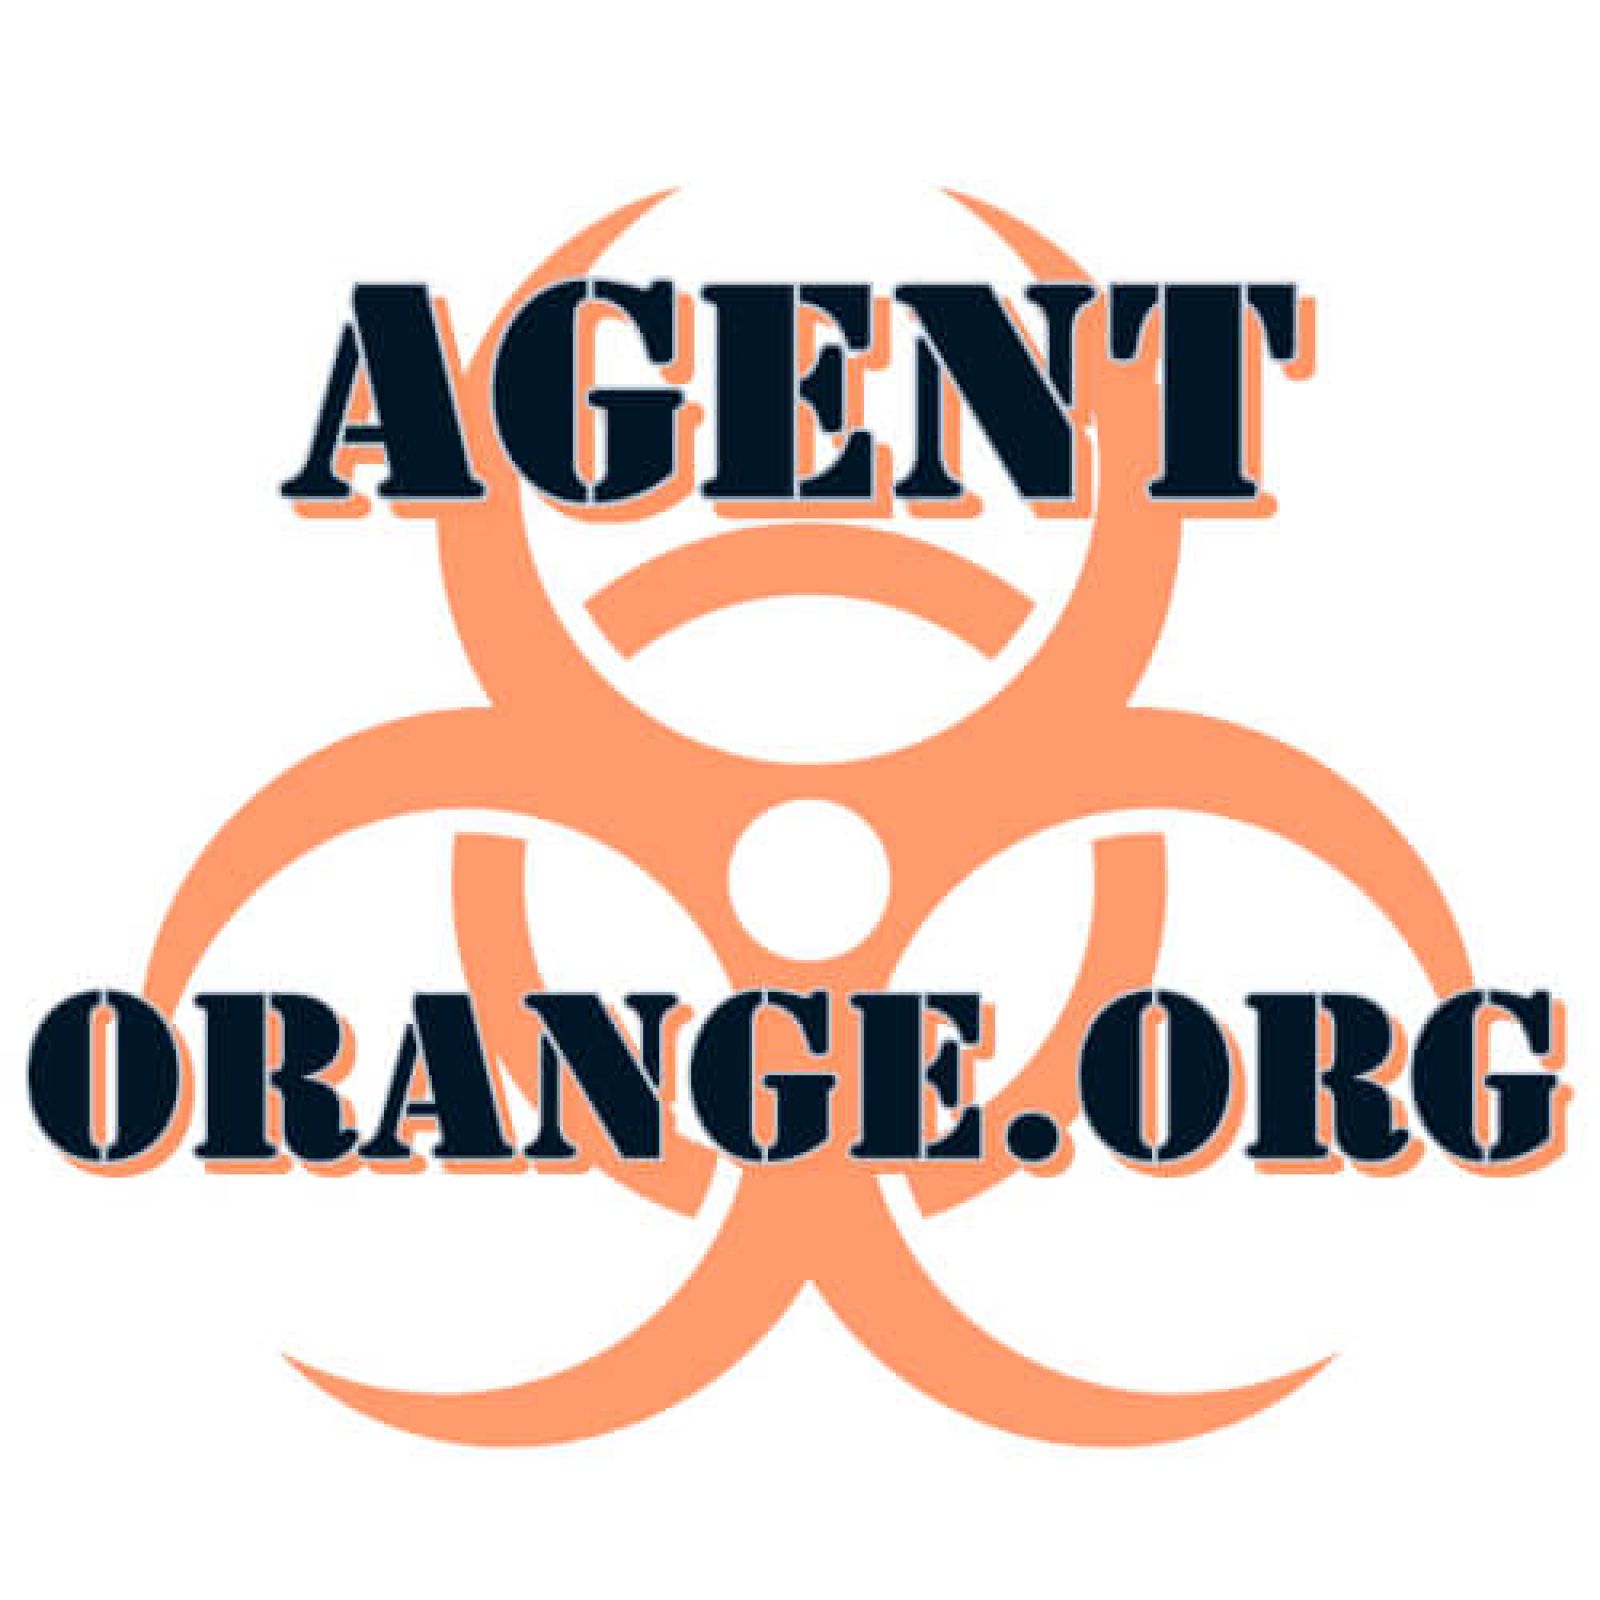 Learn more at AgentOrange.Org